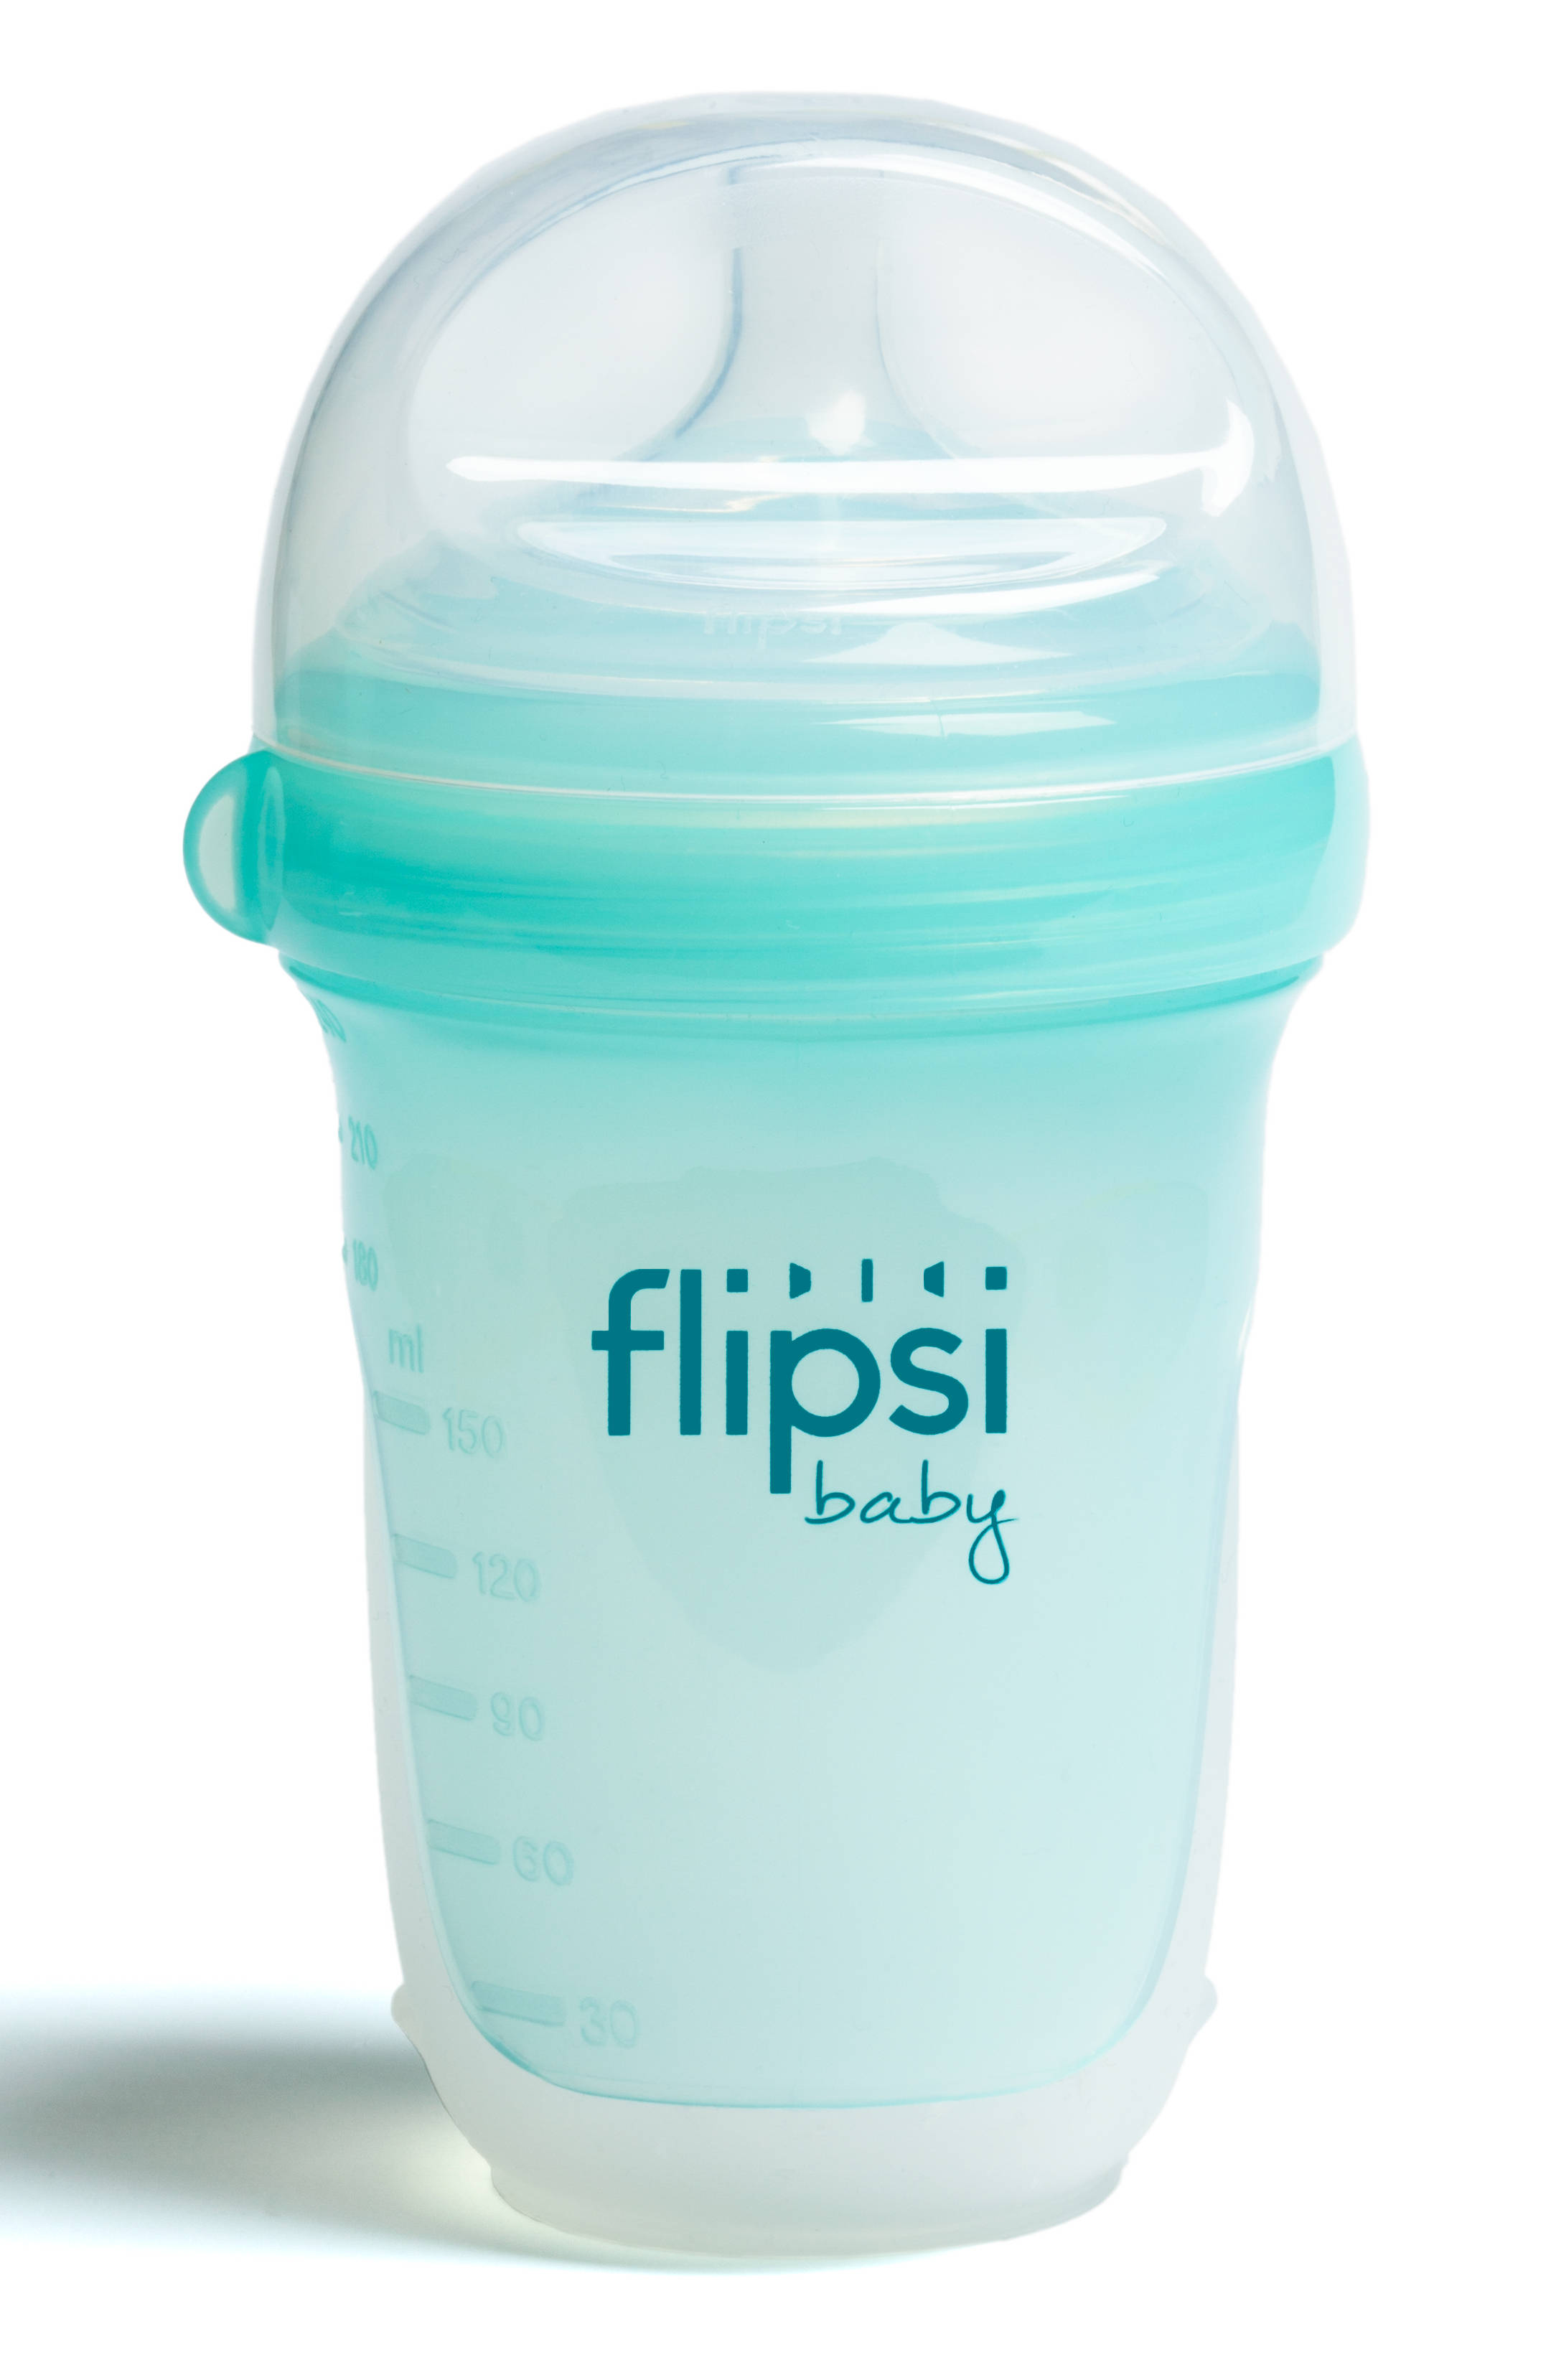 The patent-pending Flipsi Baby is constructed with food grade silicone and polypropylene which are free from BPA, BPS, phthalates, latex, nitrosamines, lead, PVC and PET.